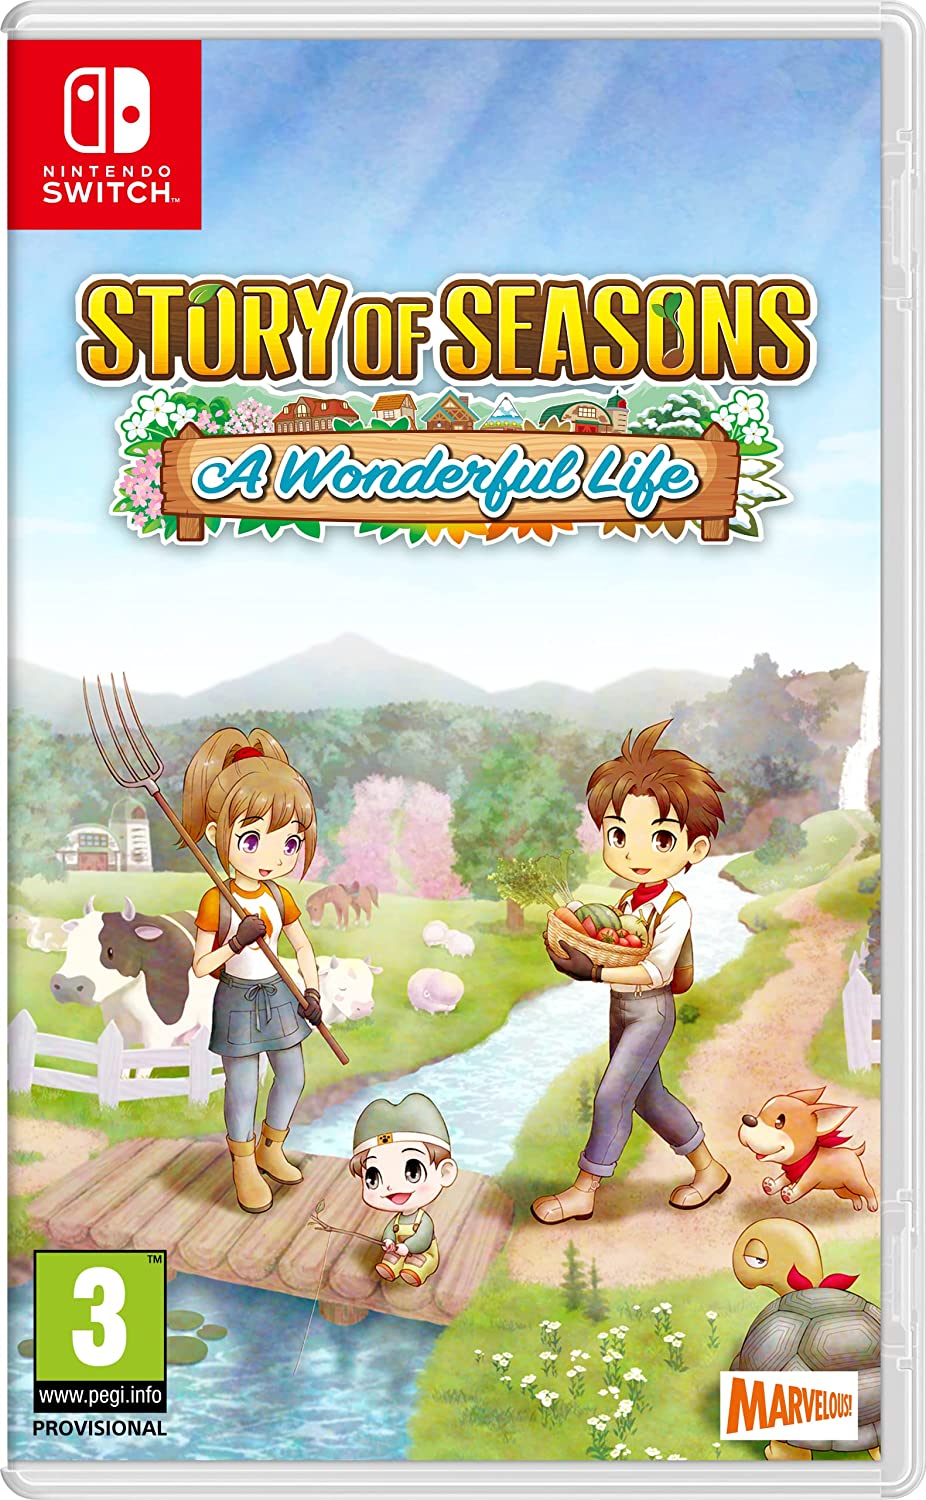 Harvest Moon Vs. Story Of Seasons: What's The Difference?